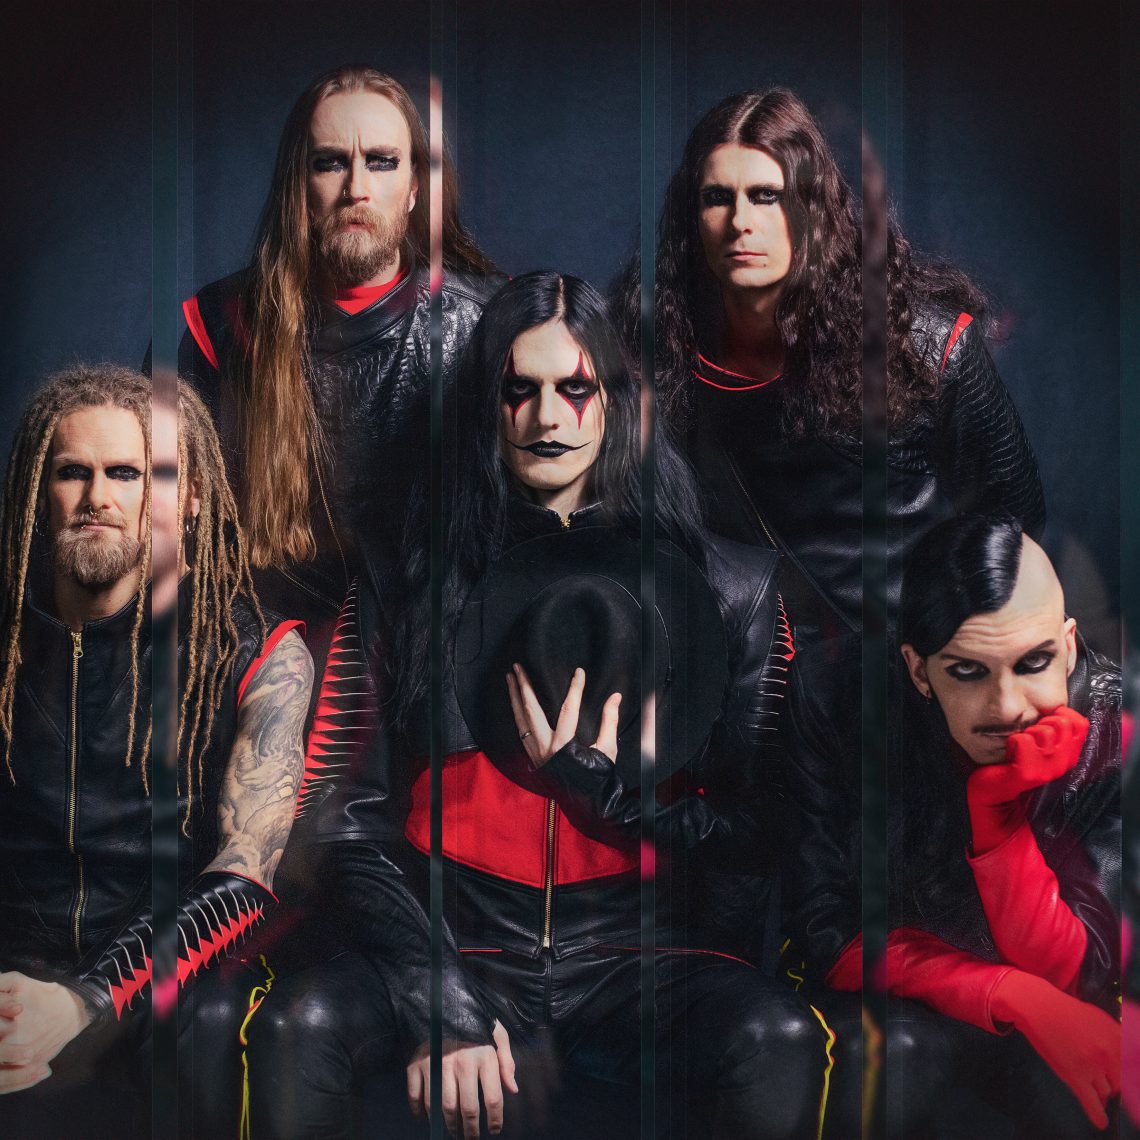 AVATAR share dark official video for new single “Colossus”